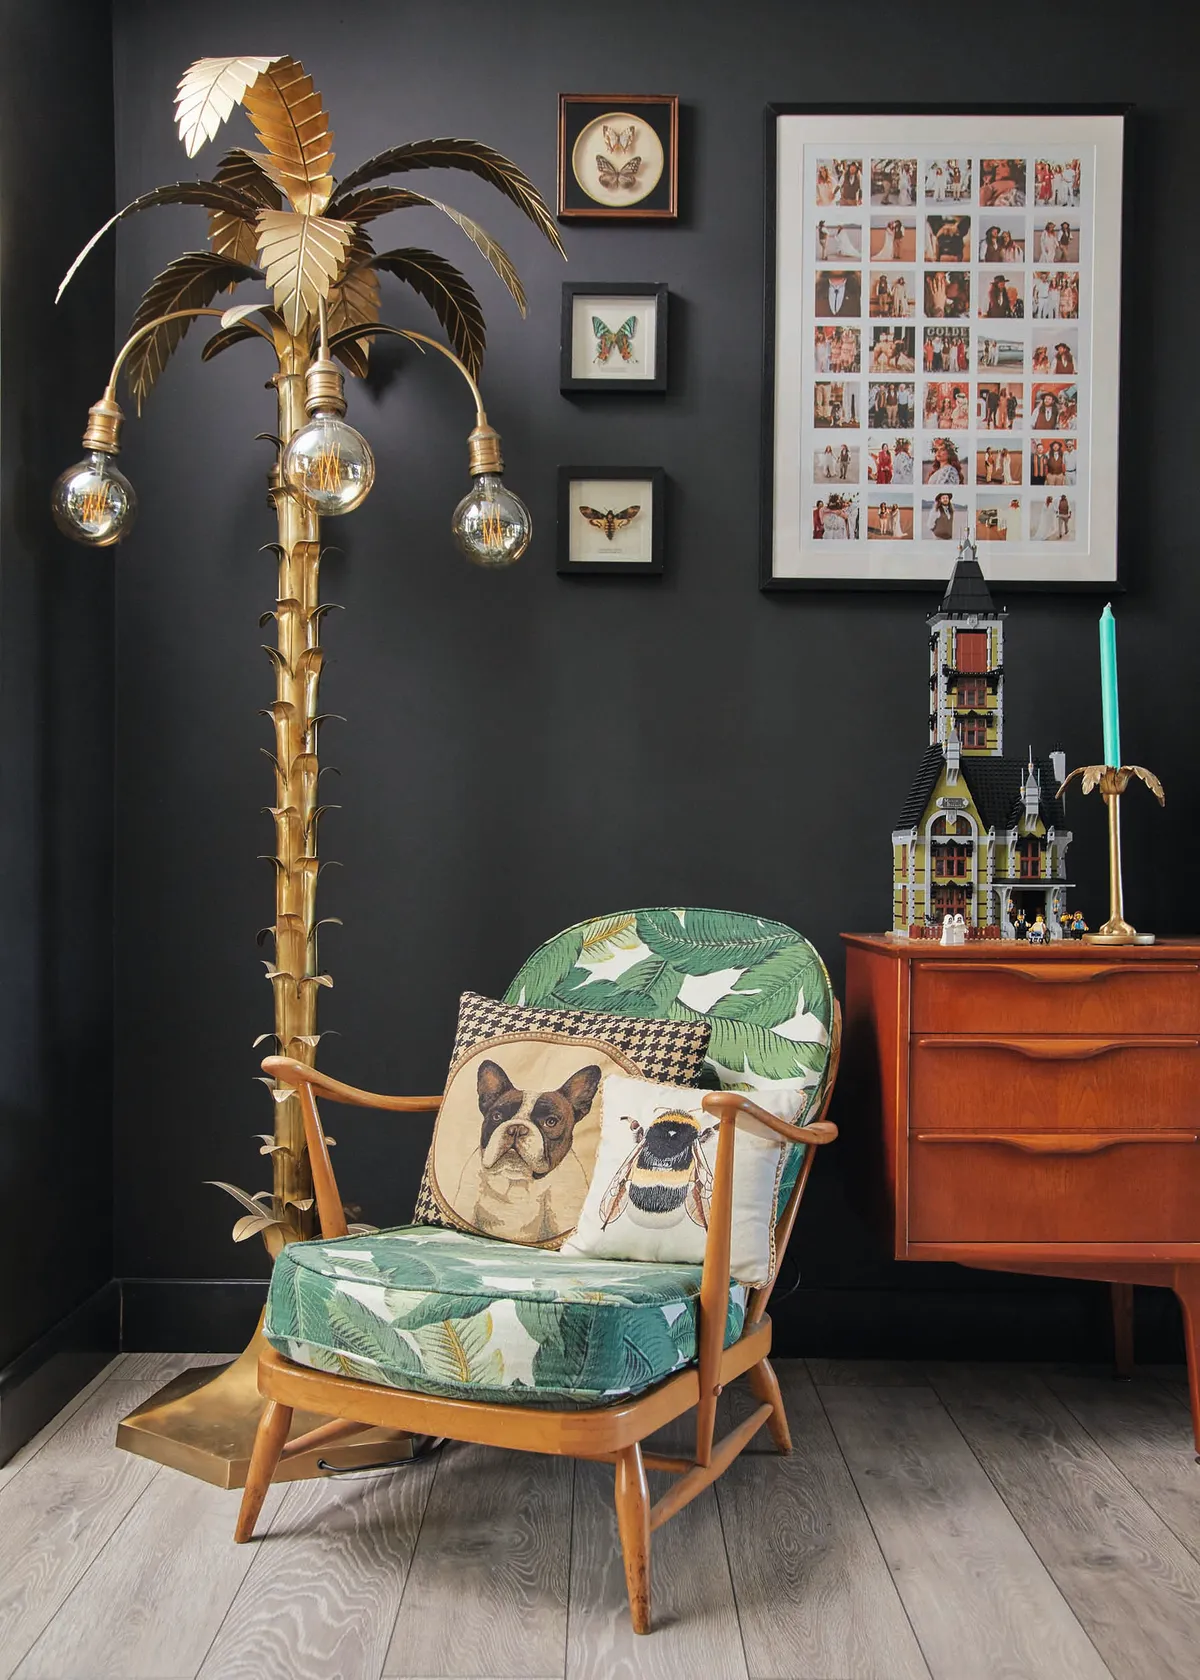 Britt's palm tree light is from Rockett St. George and the Ercol Windsor armchair has been reupholstered in a palm print fabric